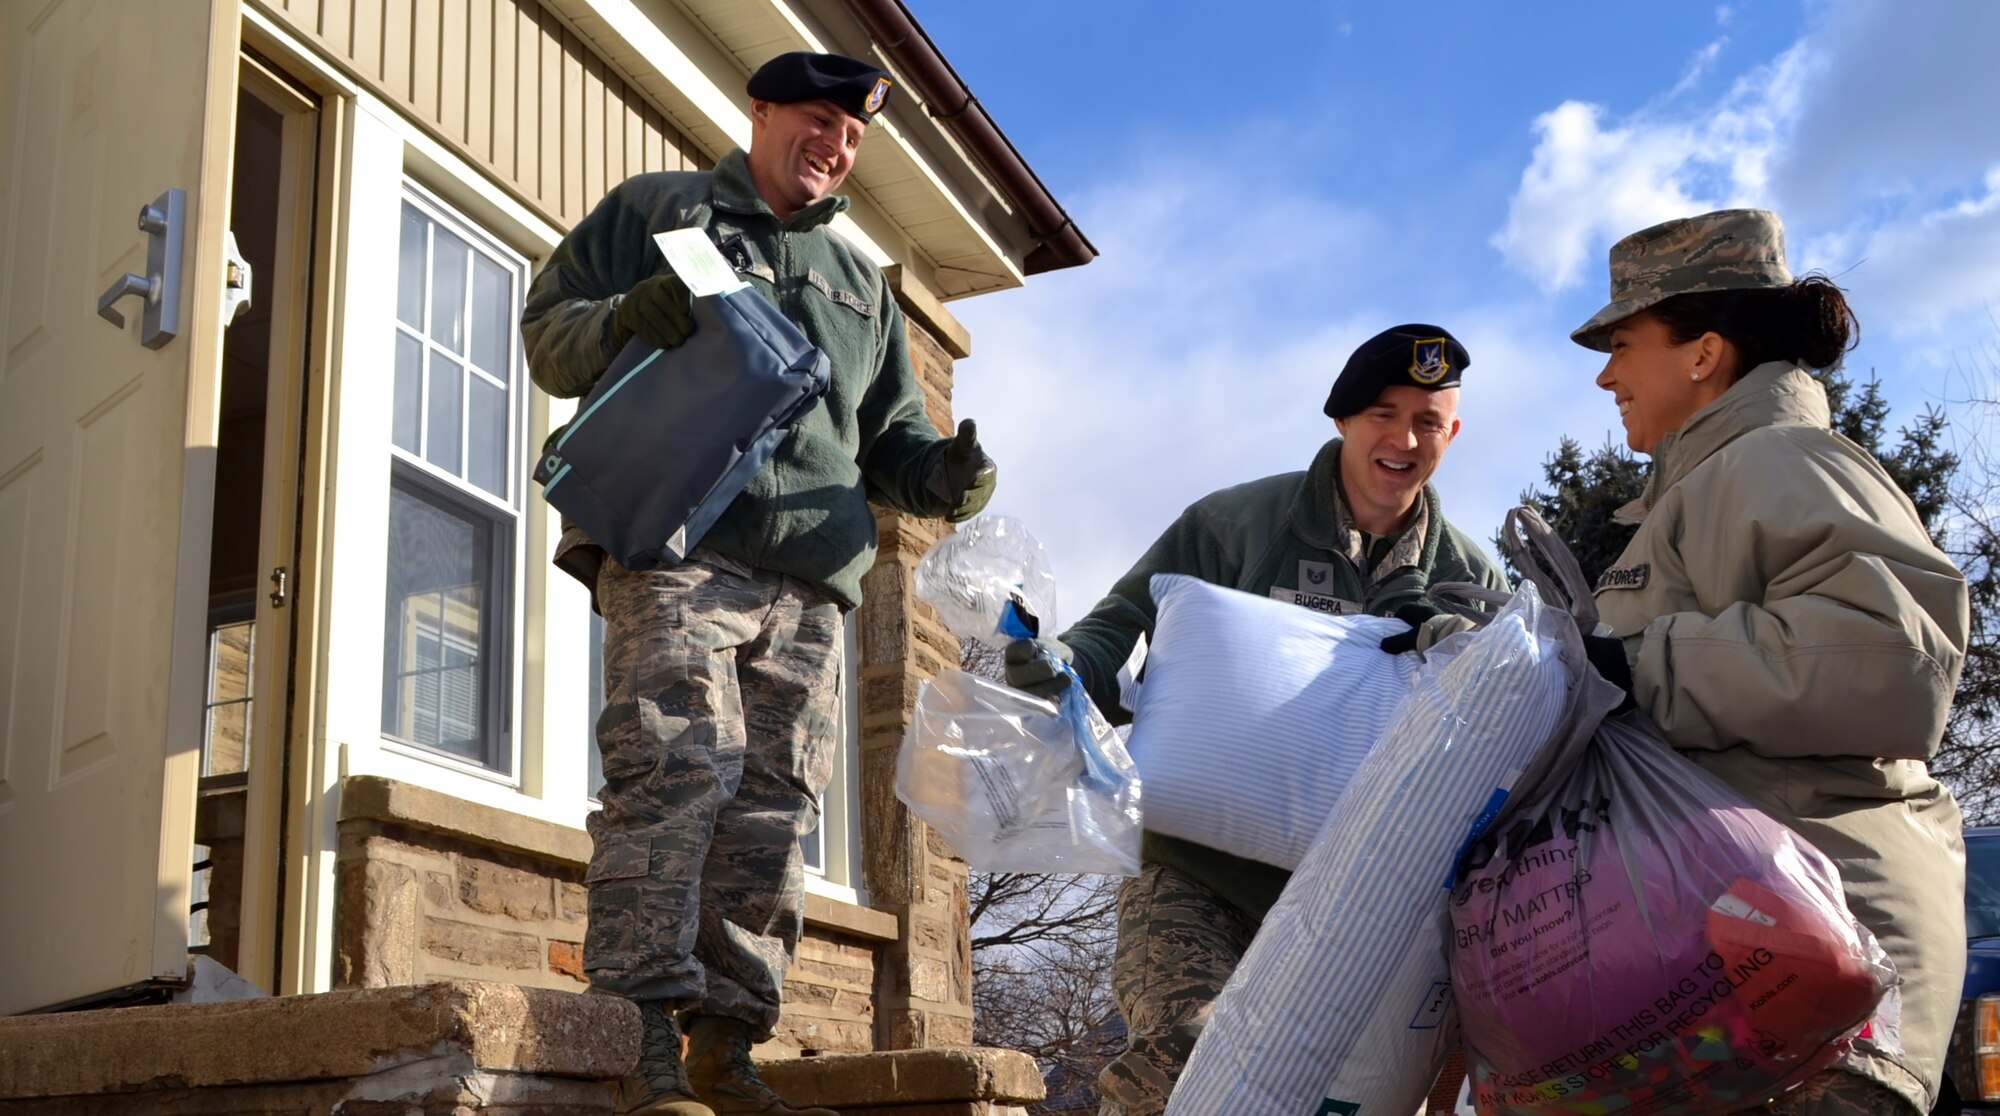 On right, Senior Master Sgt. Lauren Paul, 111th Force Support Squadron service superintendent, holds armfuls of donated items to pass off to 111th Security Forces Squadron members during the delivery to a local child services facility in Warminster, Pennsylvania, Dec. 15, 2016. Members of the Wing have conducted The Angel Tree holiday donation drive for more than 20 years. (U.S. Air National Guard photo by Tech. Sgt. Andria Allmond)
